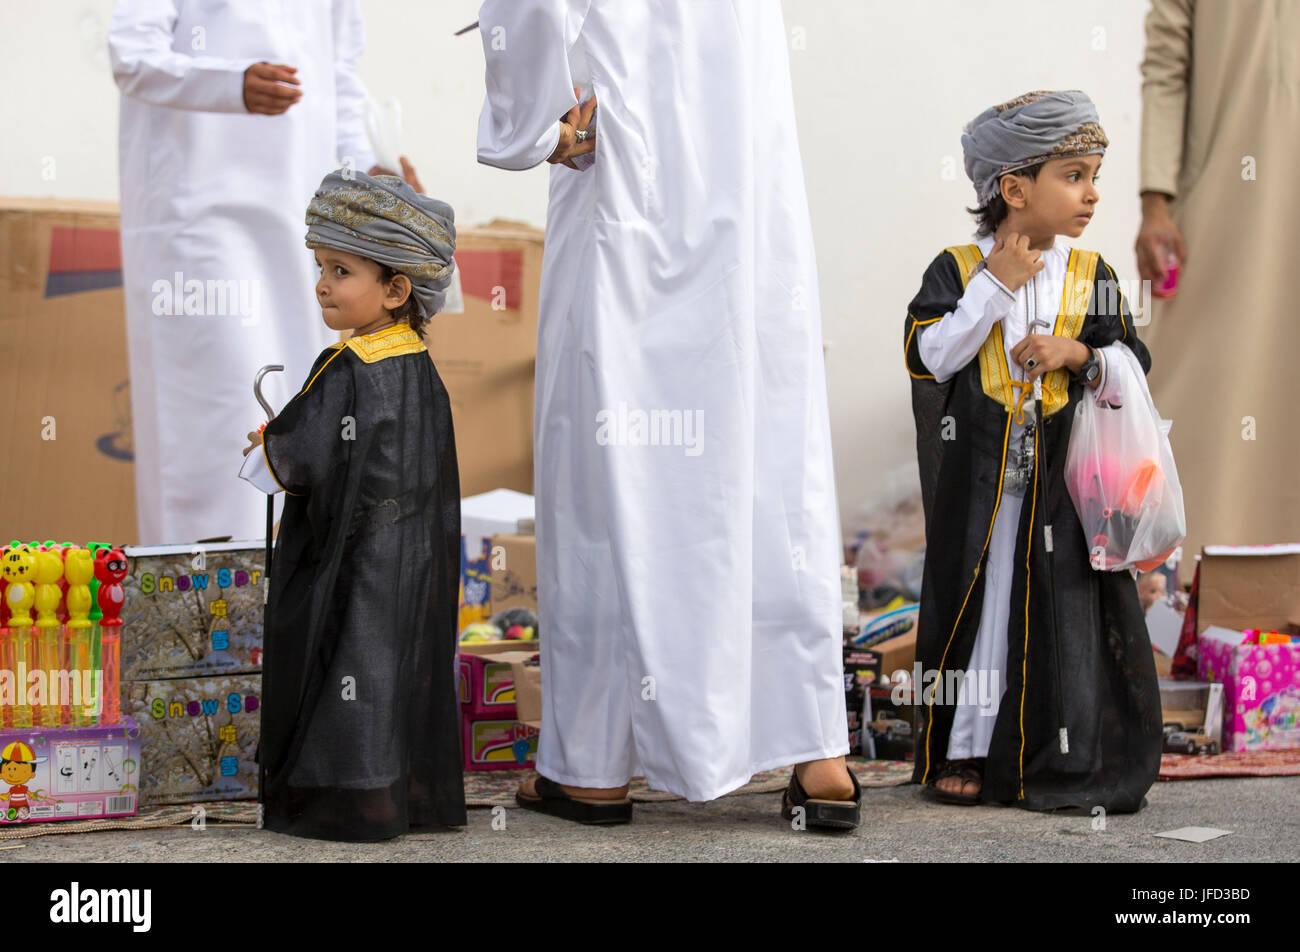 Nizwa, Oman - June 26th 2017: people at a toy market on a day of Eid al Fitr, celebration at the end of Holy Month of Ramadan Stock Photo